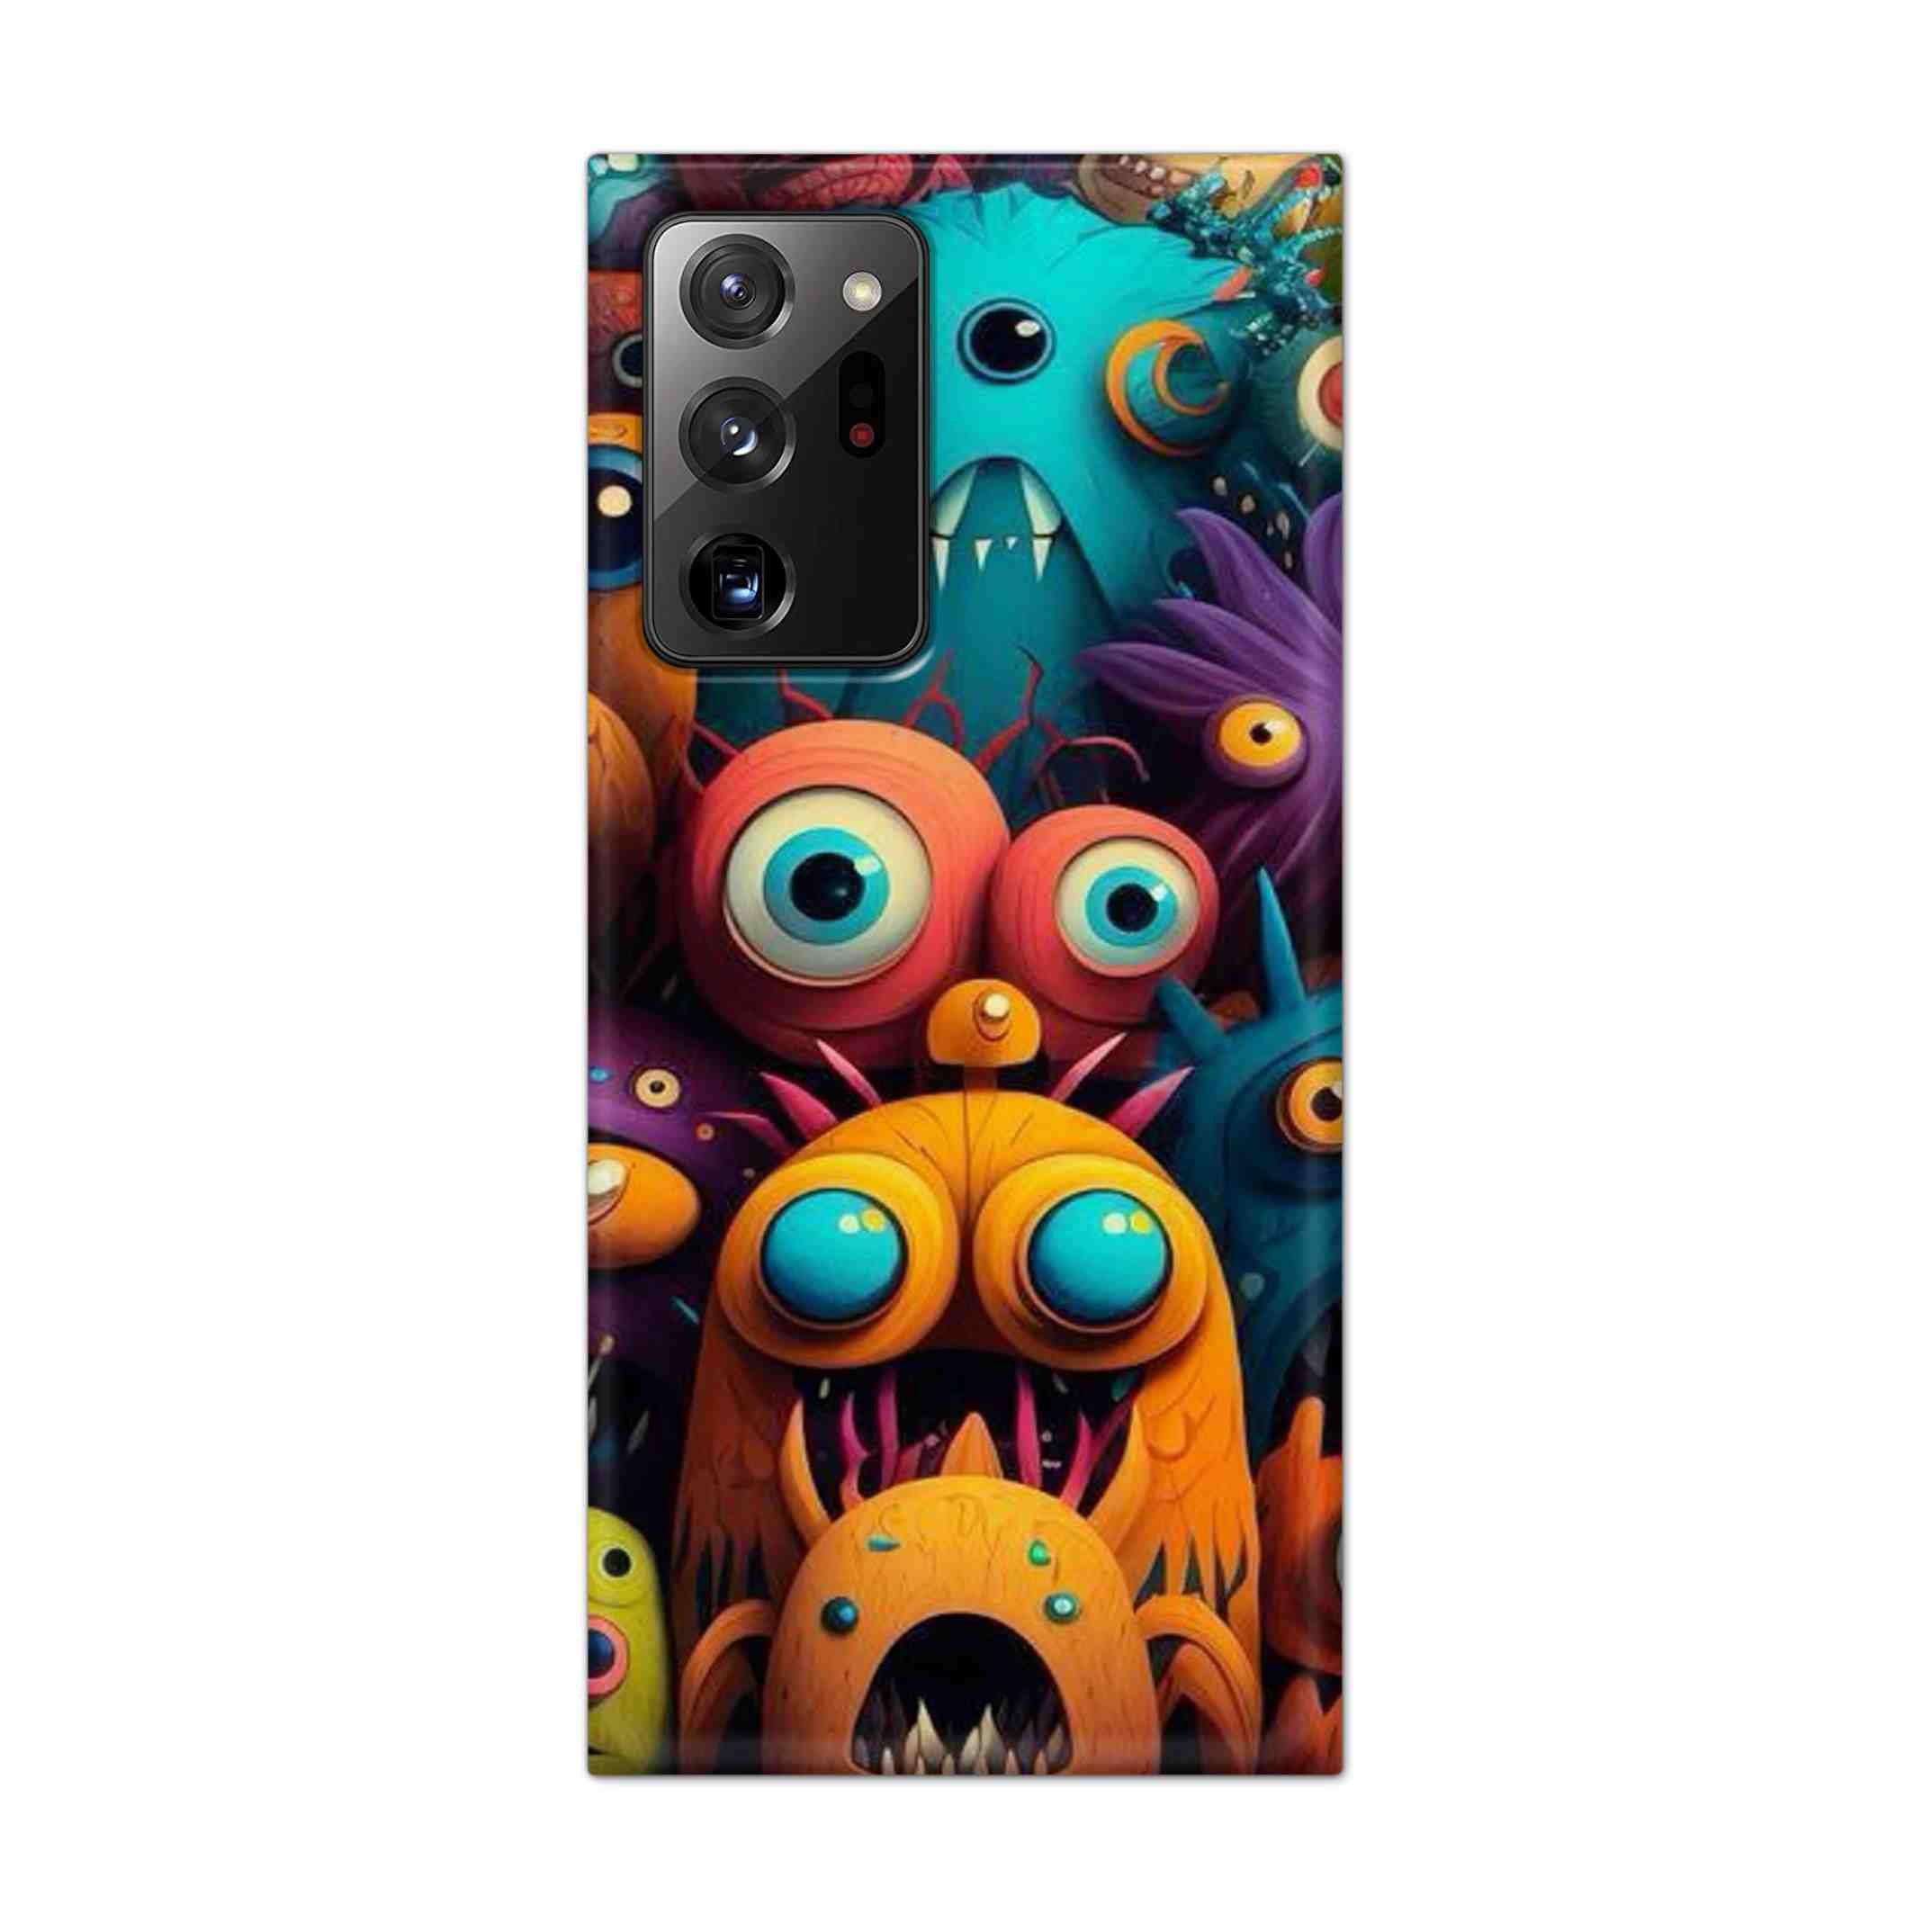 Buy Zombie Hard Back Mobile Phone Case Cover For Samsung Galaxy Note 20 Ultra Online